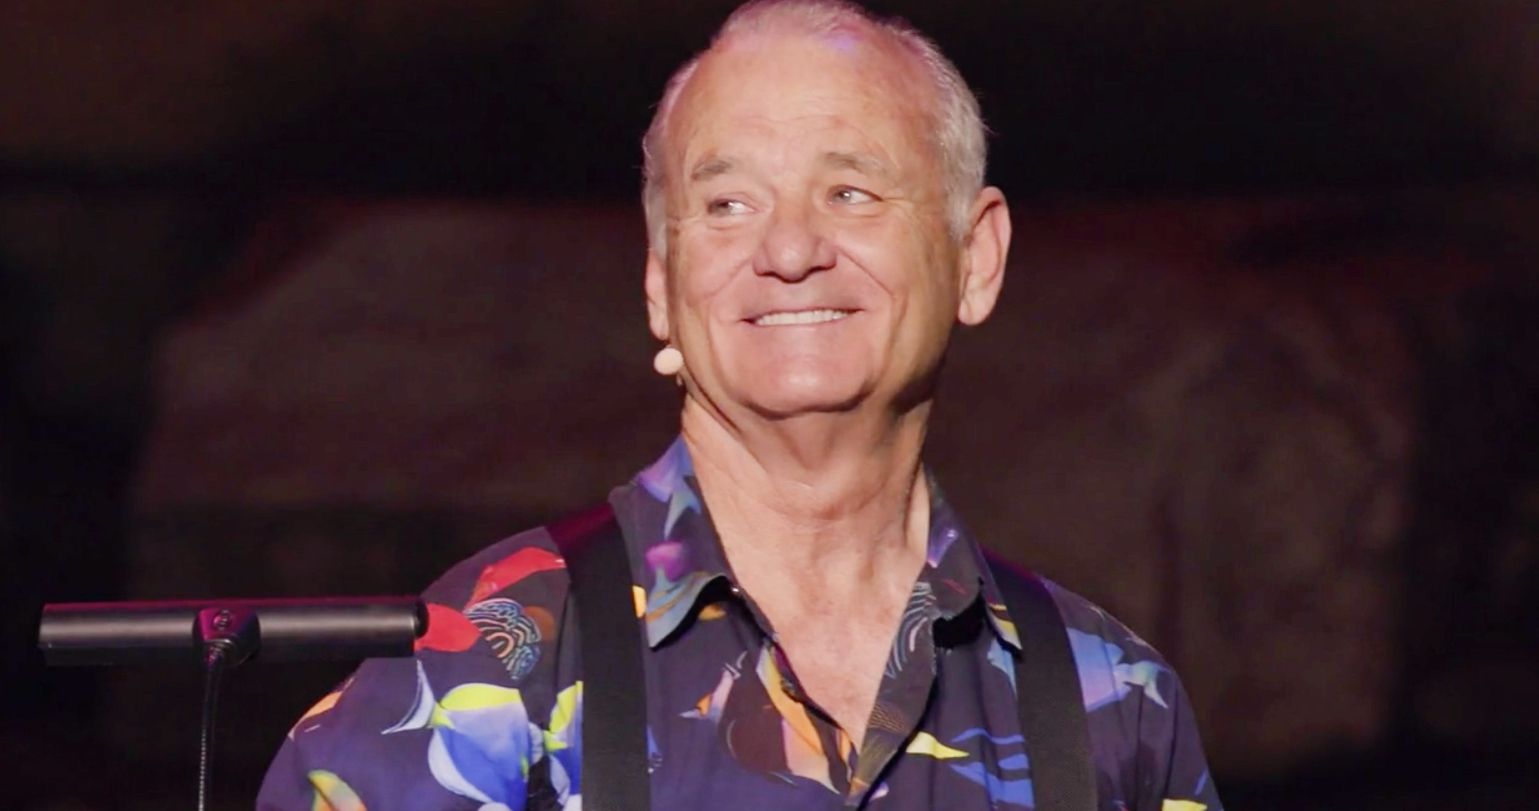 Bill Murray's Concert Film Arrives in New Worlds: The Cradle of Civilization Trailer